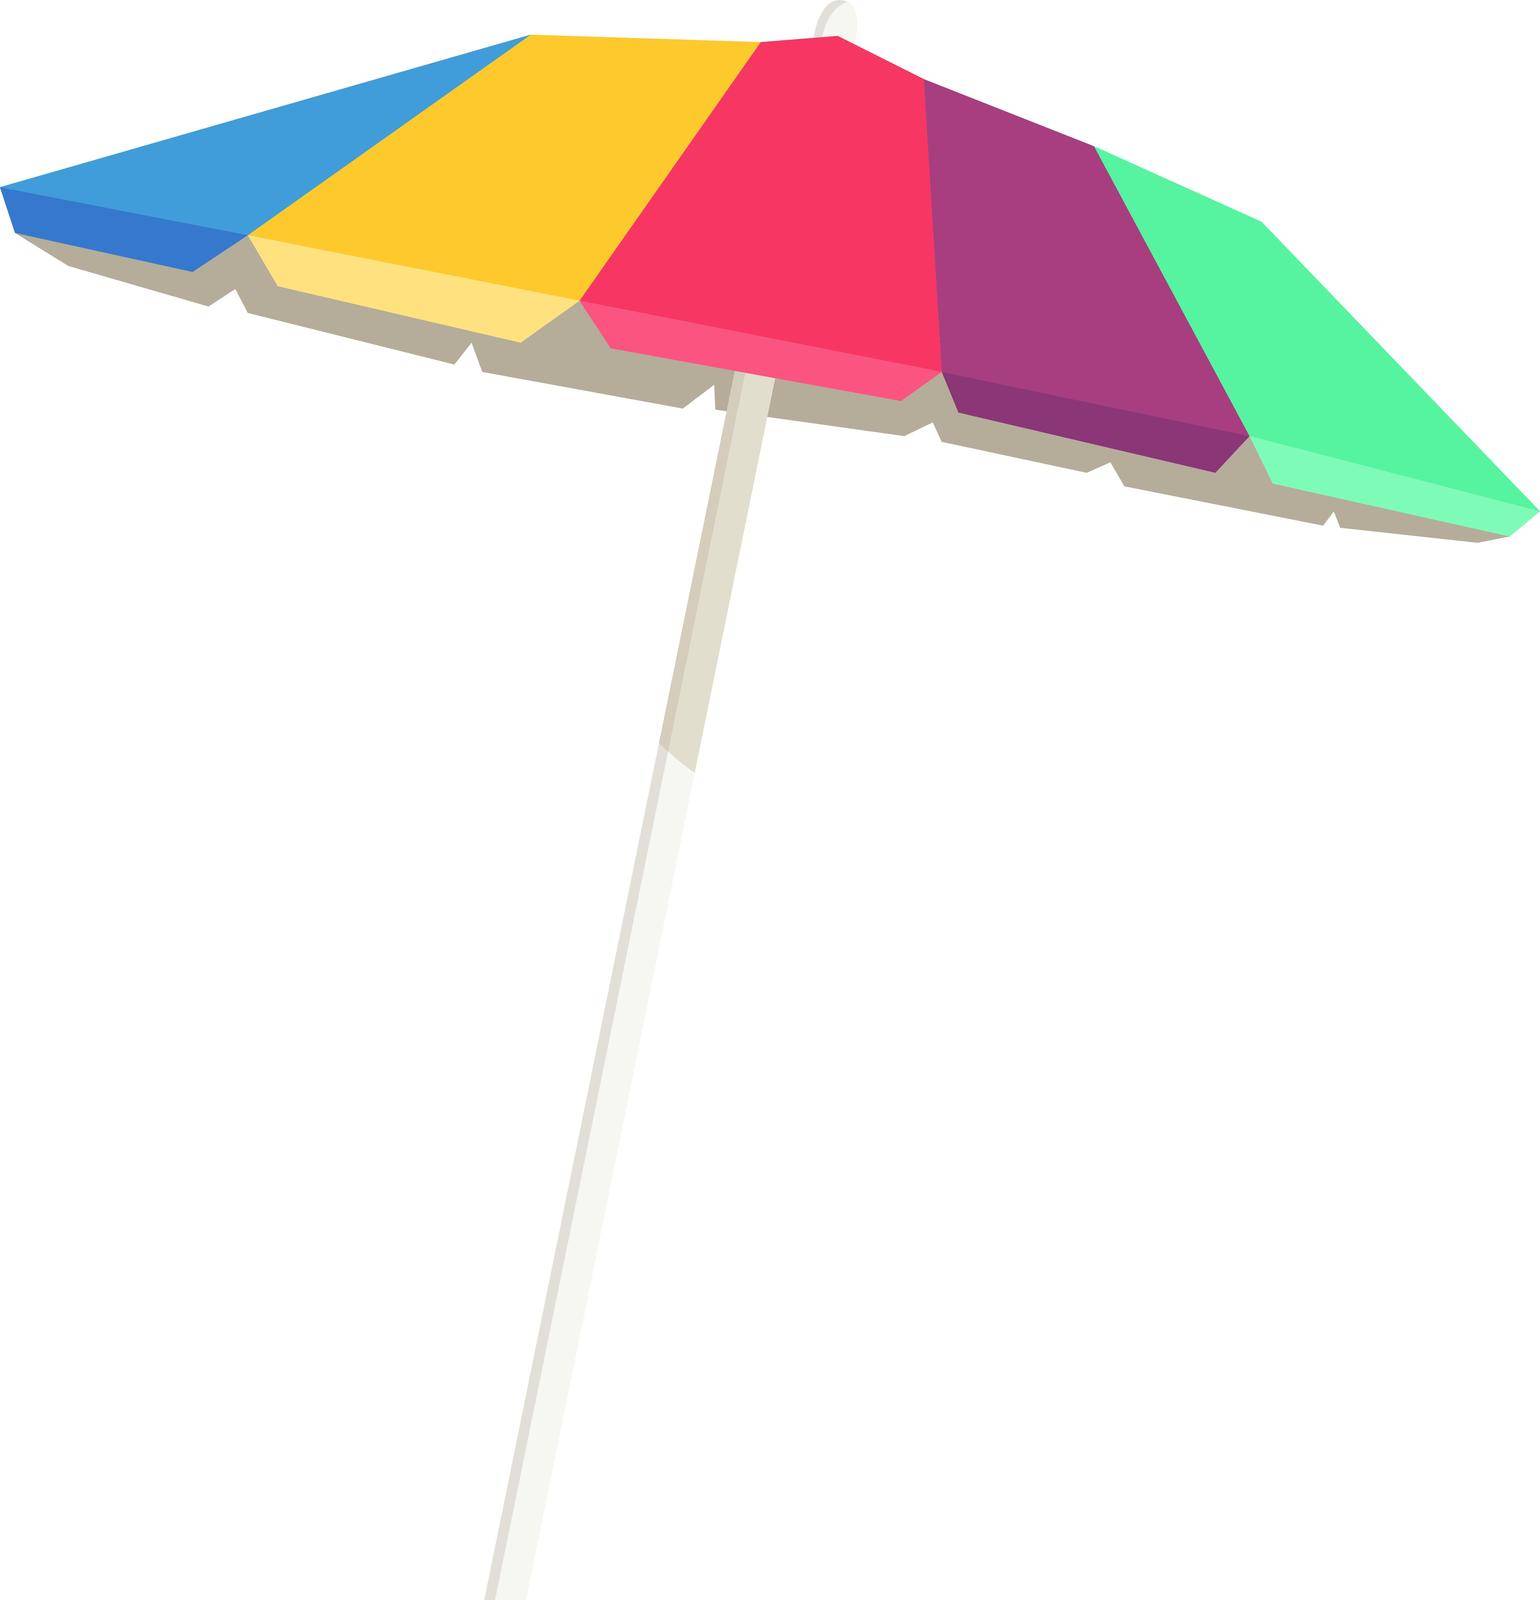 Beach umbrella. Colorful summer sunshade on metal pole isolated on white background